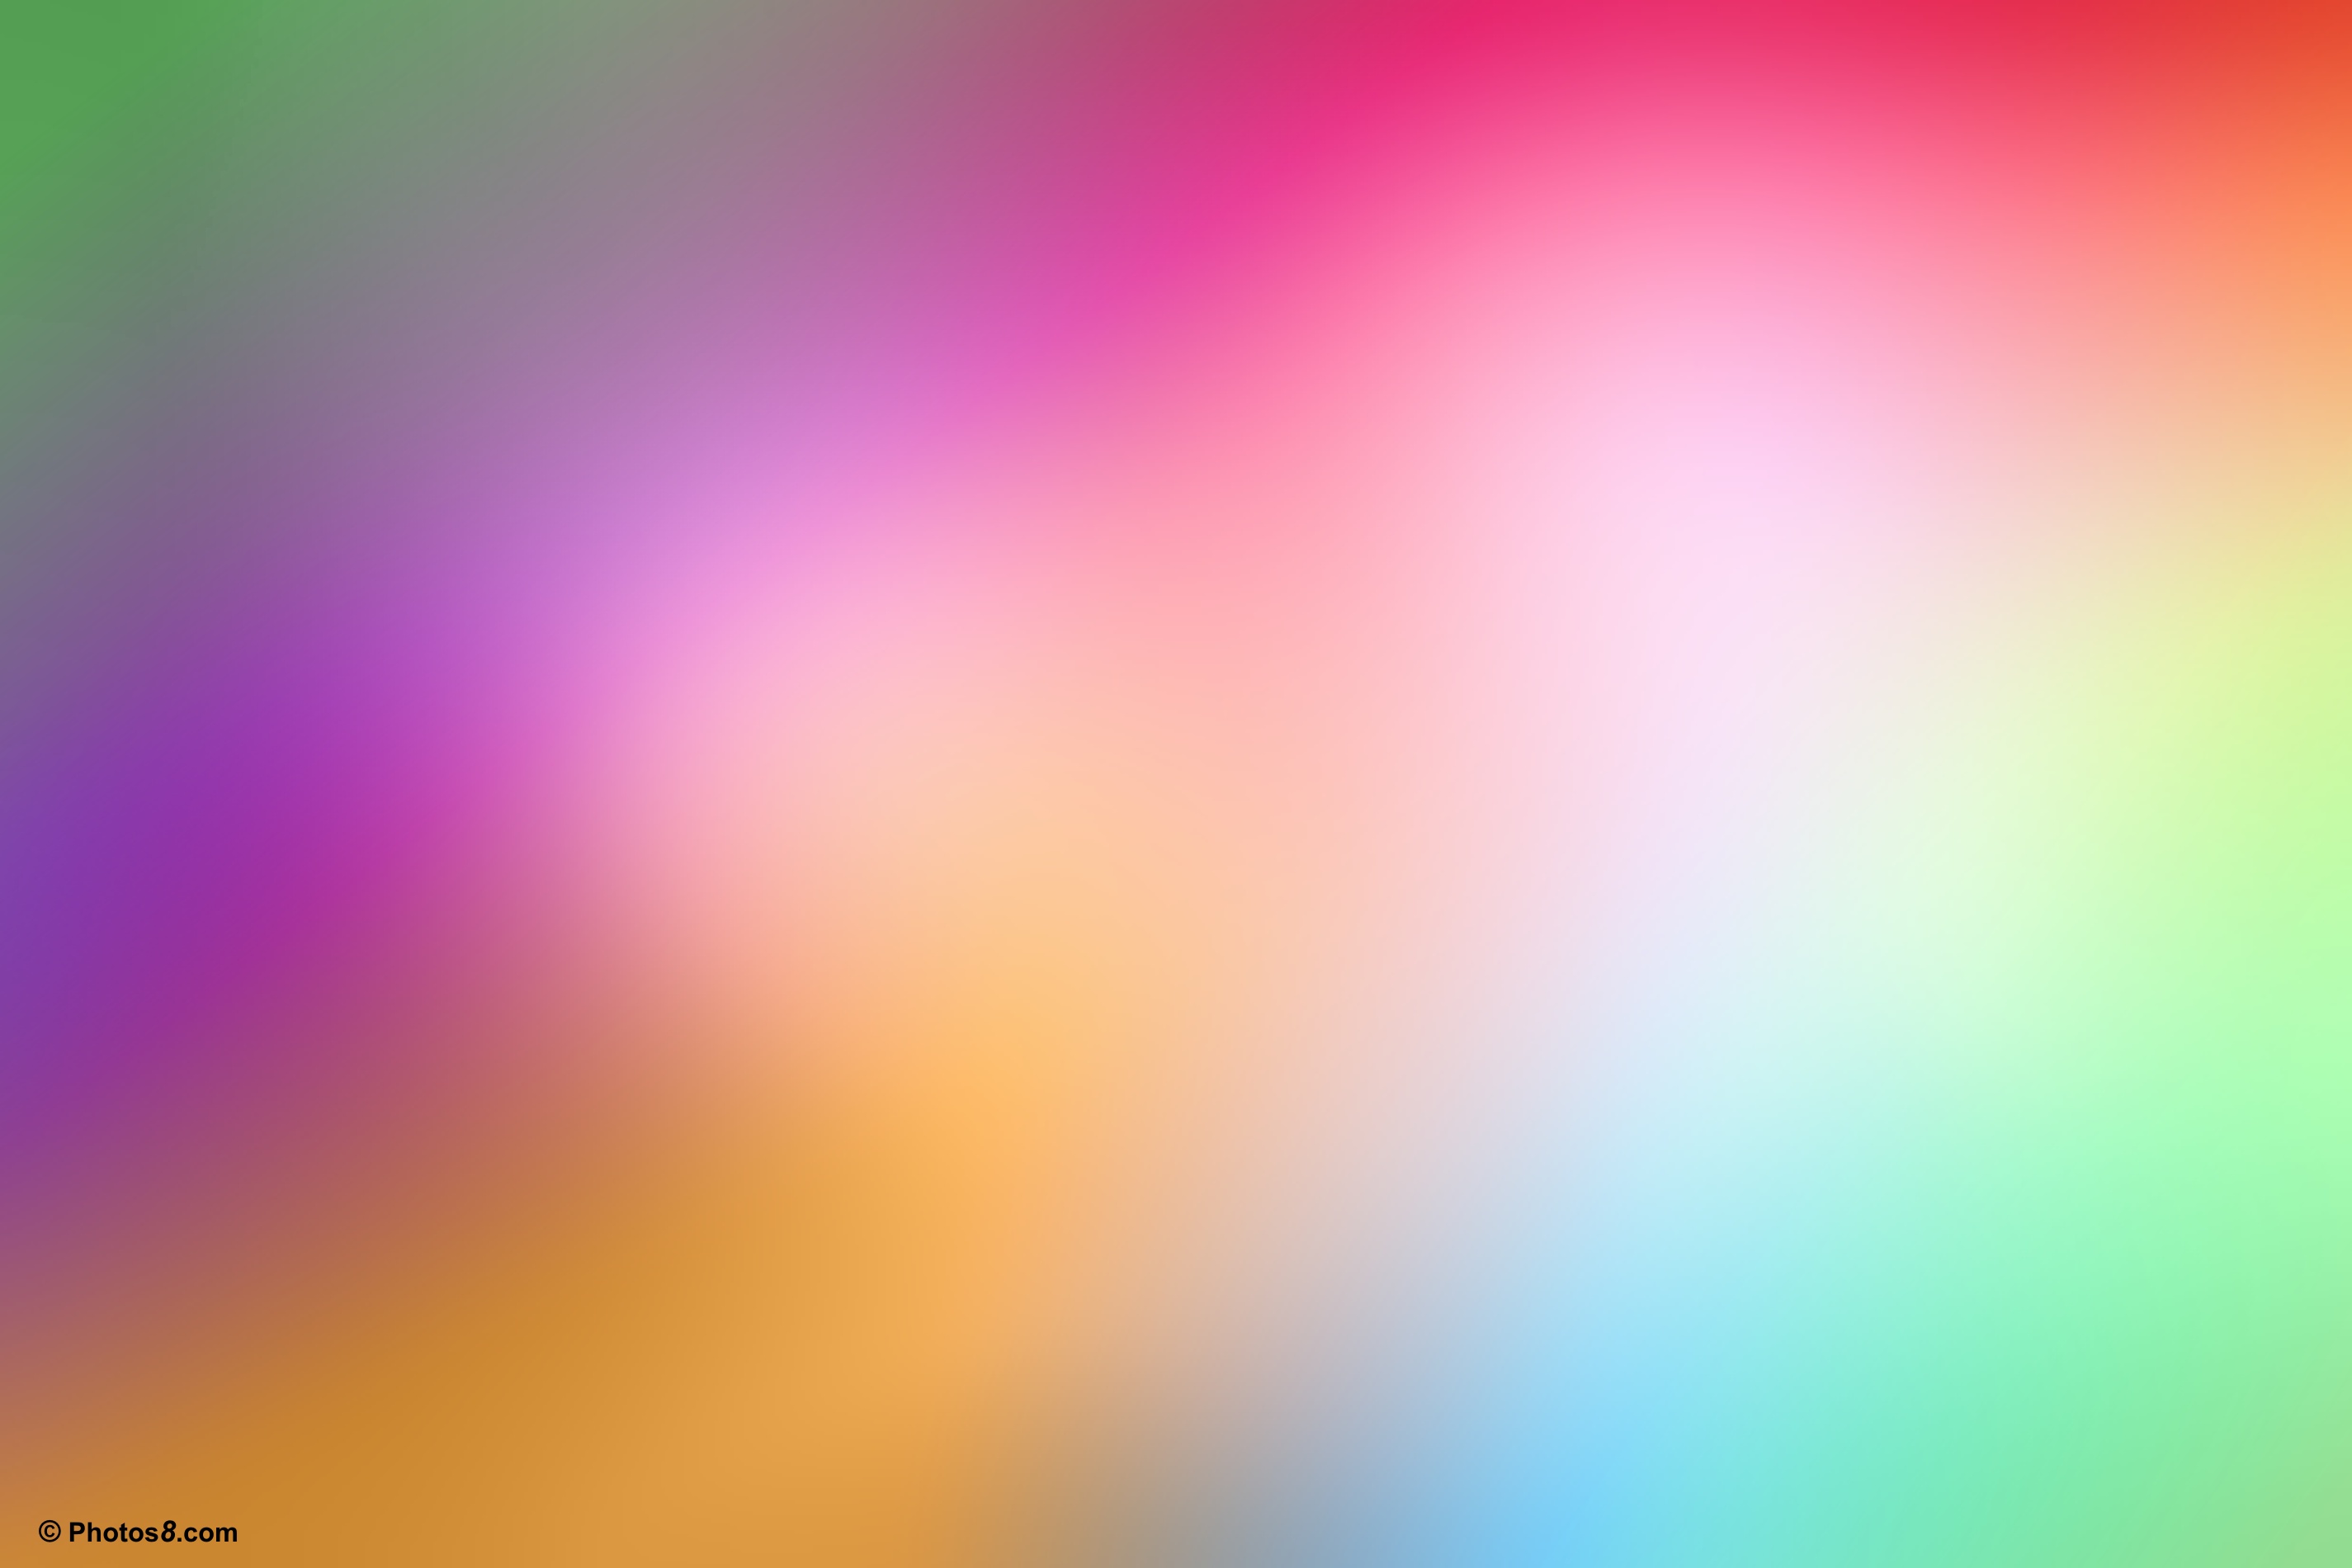 Free download Pics Photo Blurred Colors Image Background For [2850x1900] for your Desktop, Mobile & Tablet. Explore Background Colors. Colors Background, Background Colors, Colors Background